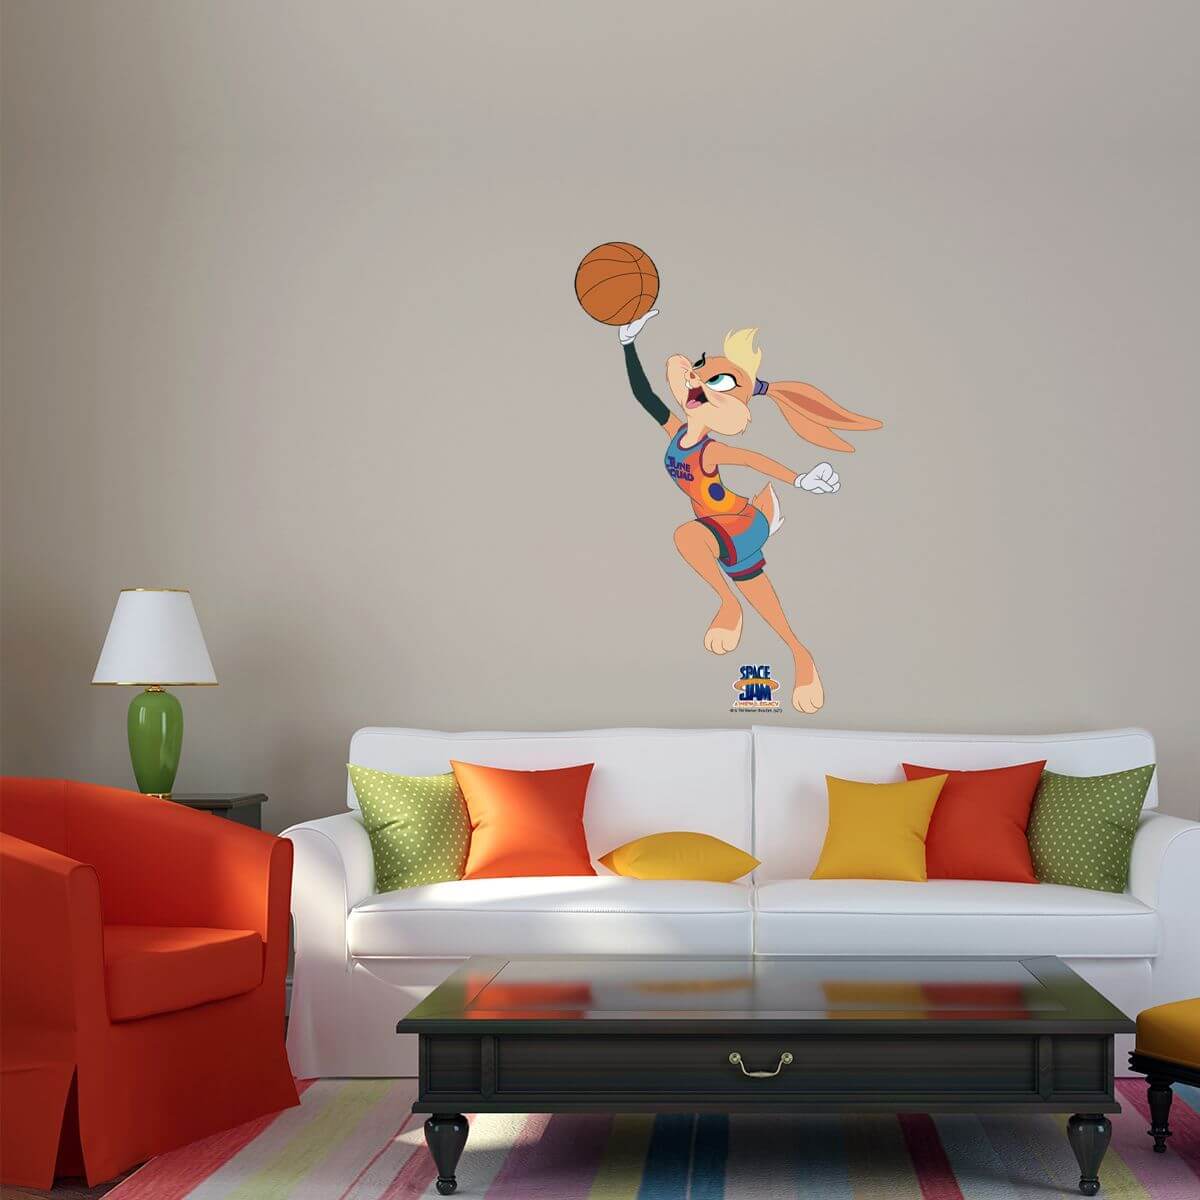 Kismet Decals Space Jam: A New Legacy Lola Bunny Lay-up Licensed Wall Sticker - Easy DIY Looney Tunes Home & Room Decor - Kismet Decals